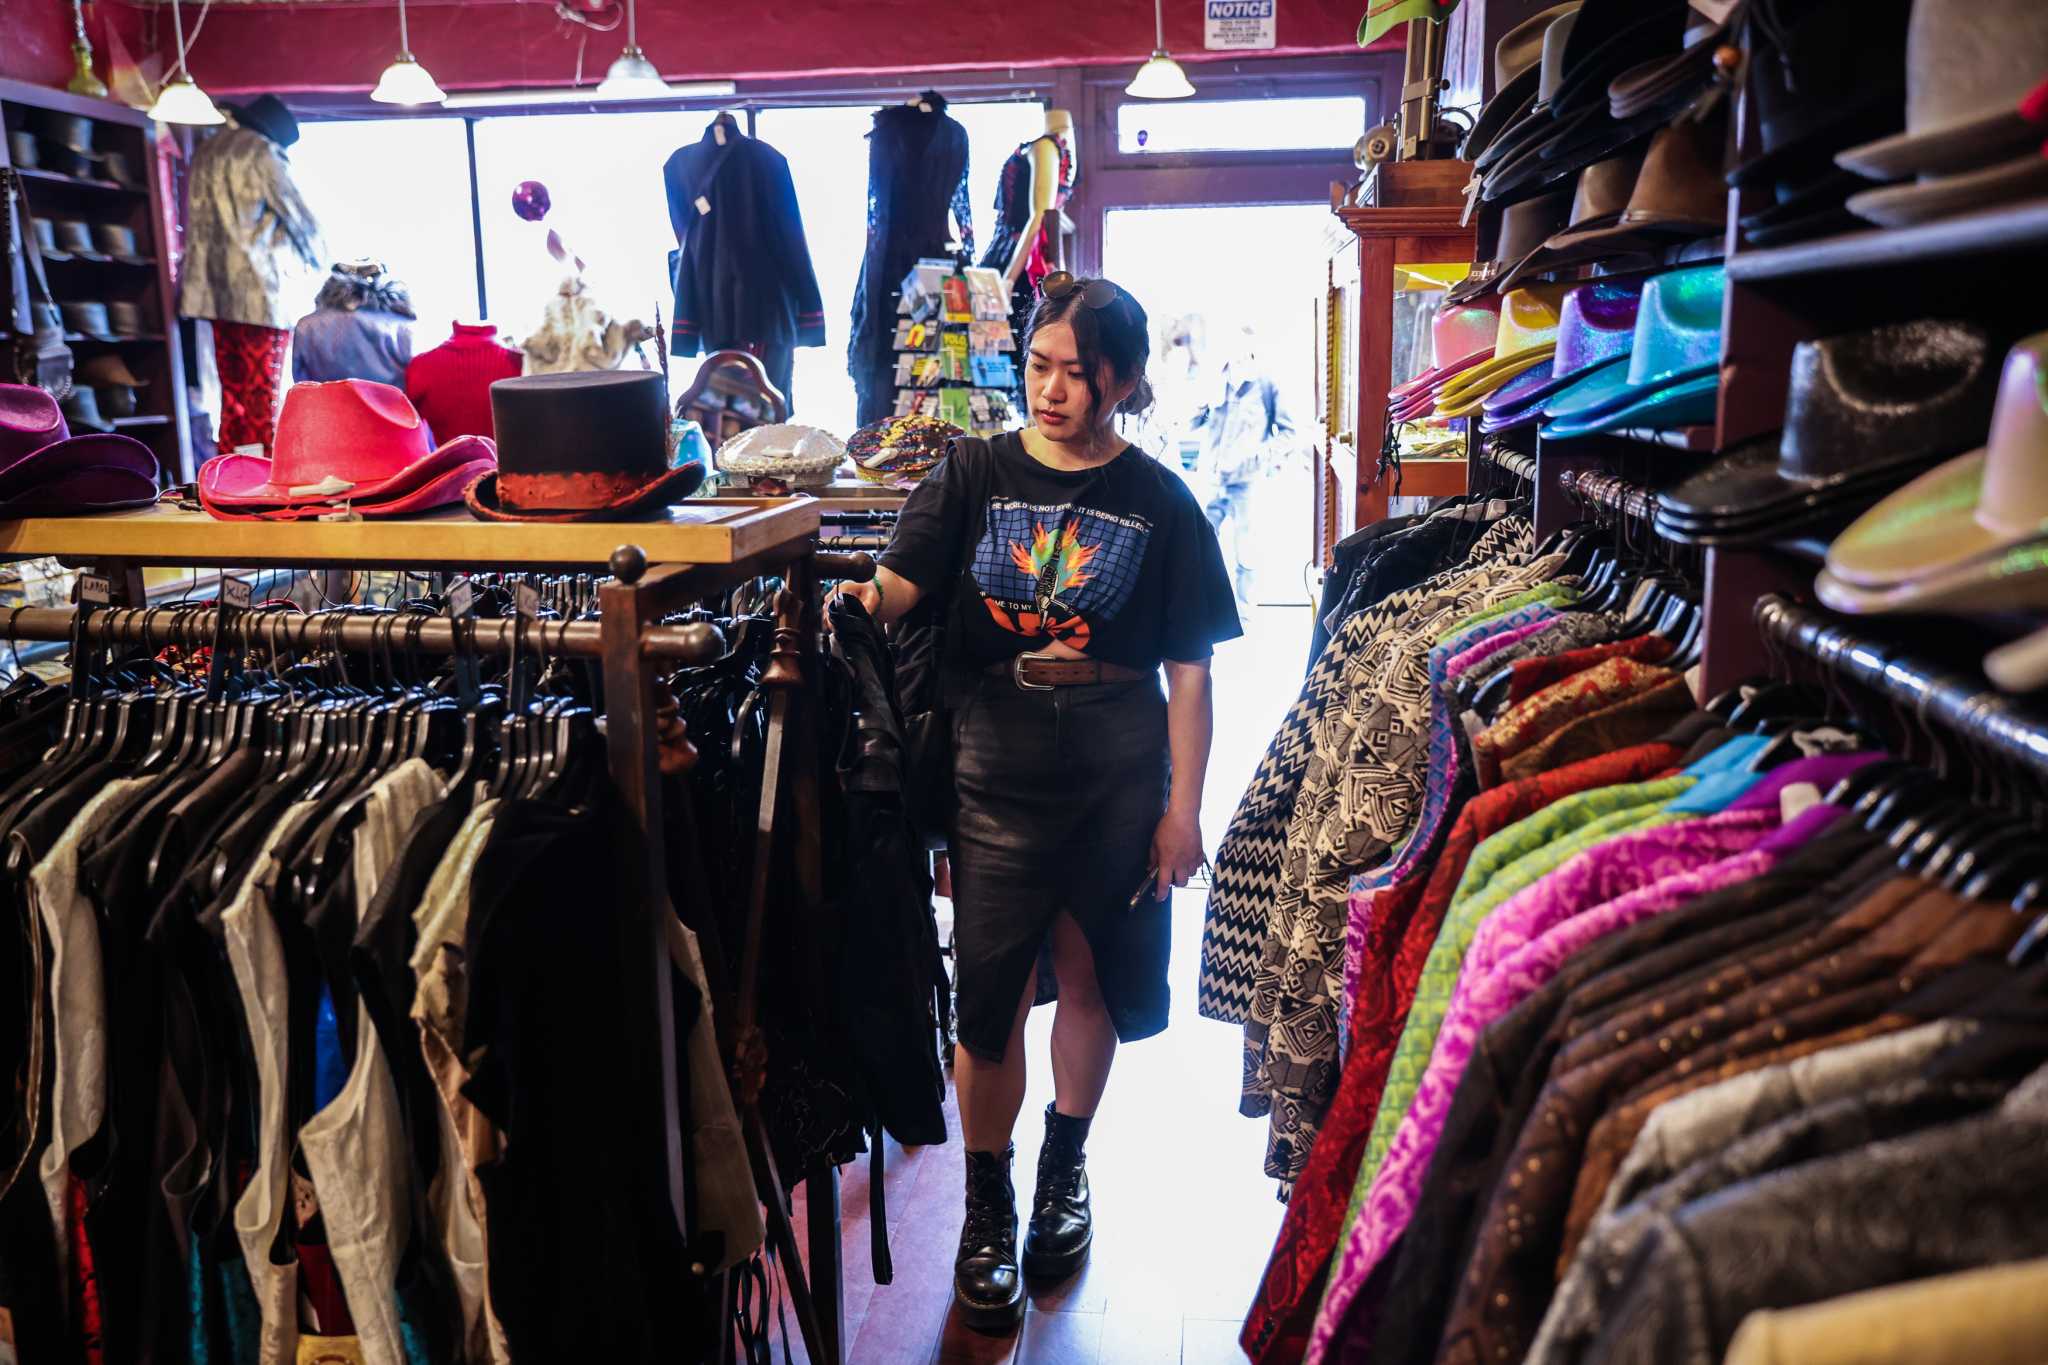 One of Haight-Ashbury’s oldest stores could close after 41 years